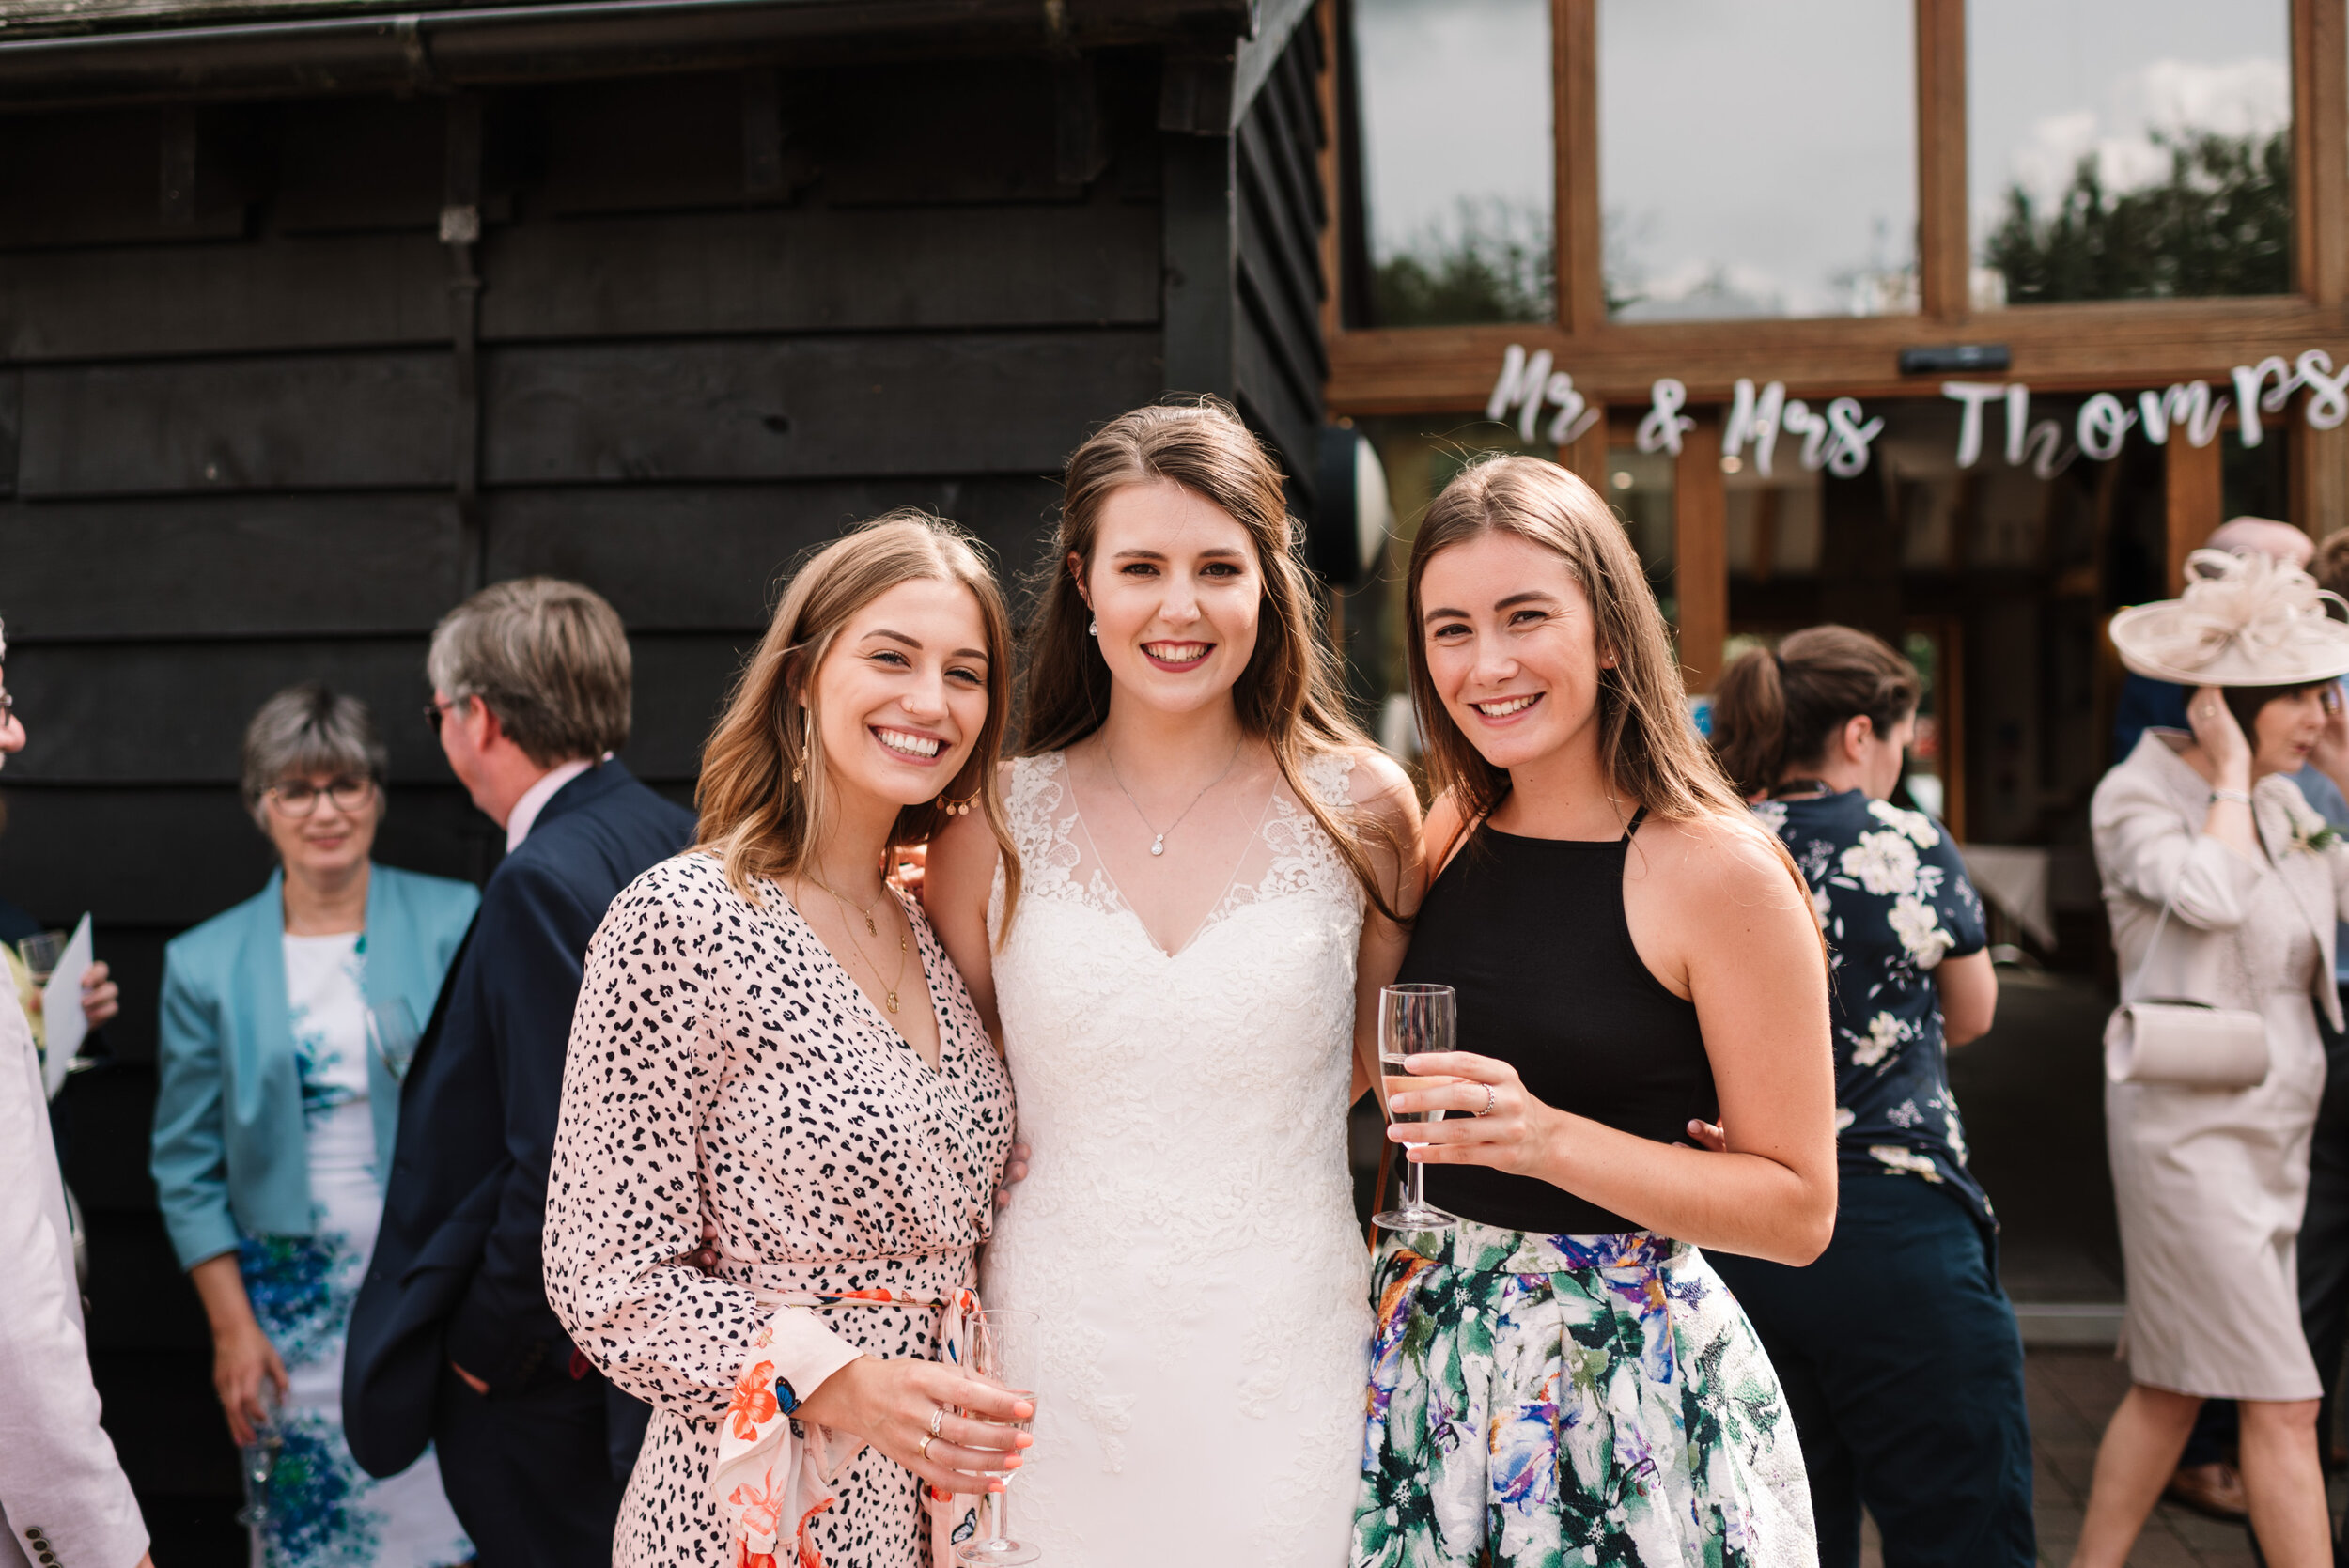 Bride and two friends posing for photo at Hanger Farm wedding venue